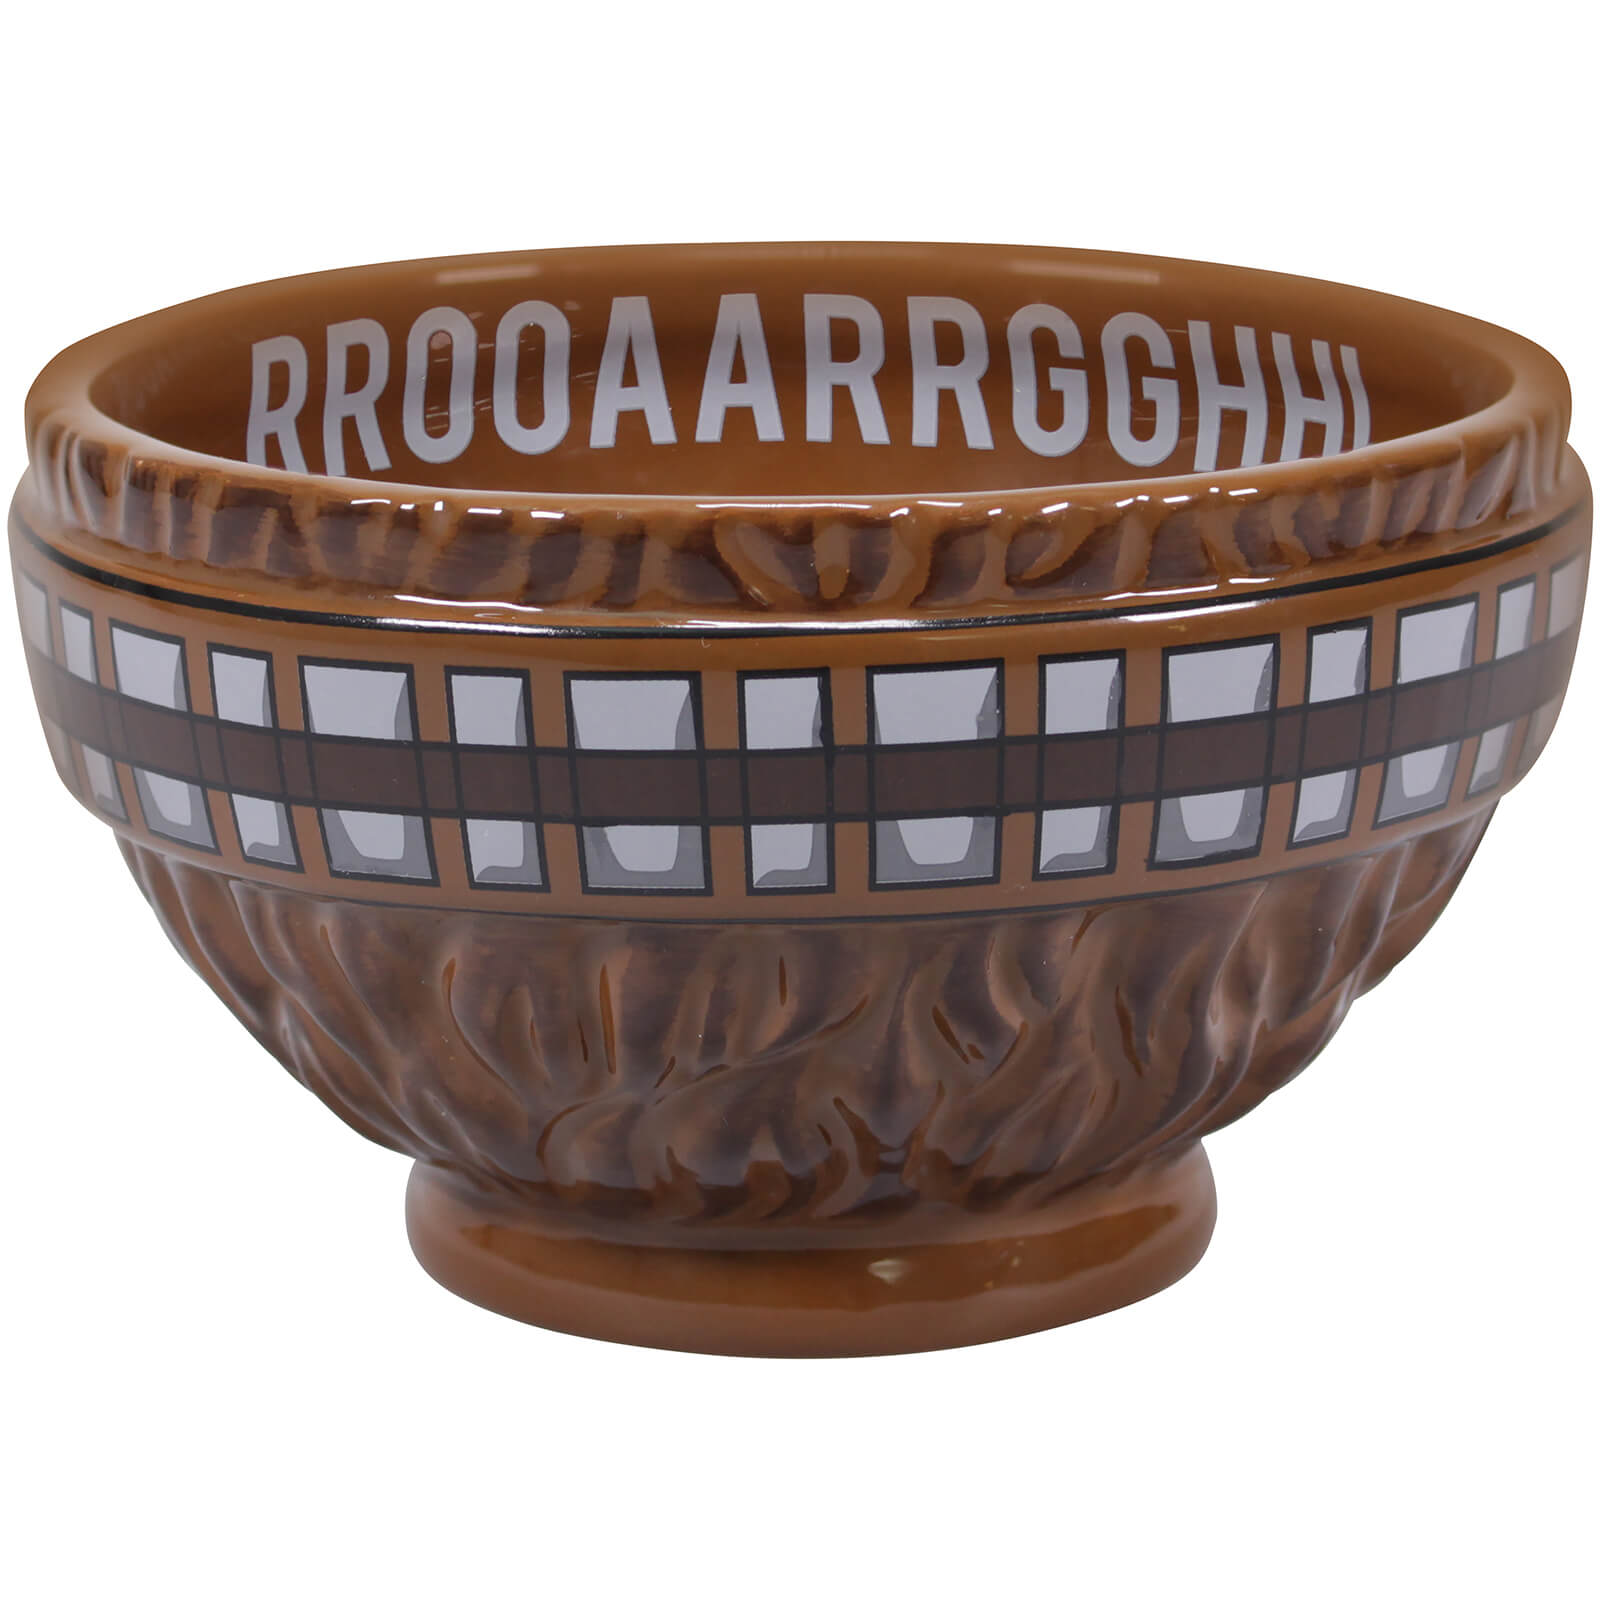 chewbacca bowl gifts for kids